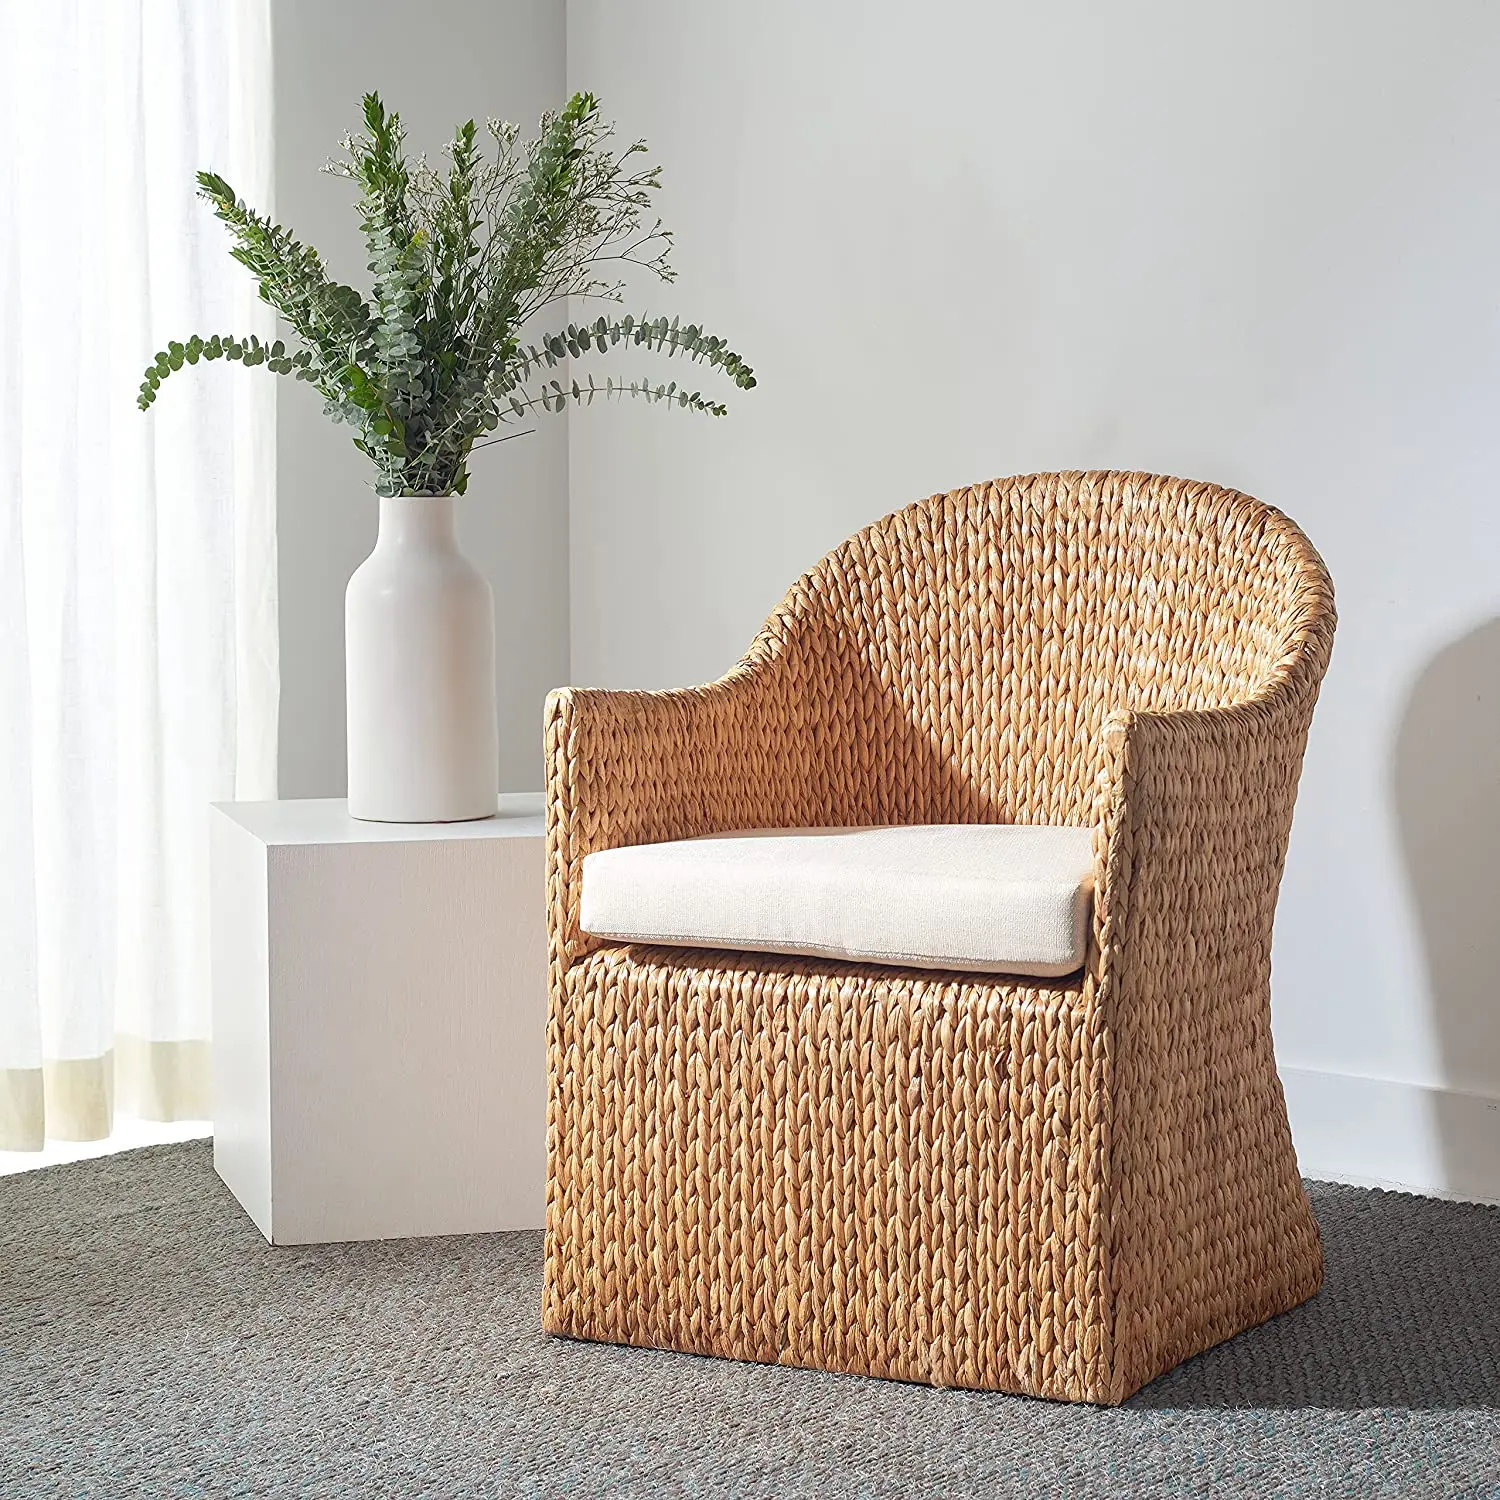 Outdoor Rocking Chair Made Of Rattan,Rattan Furniture For Home ...